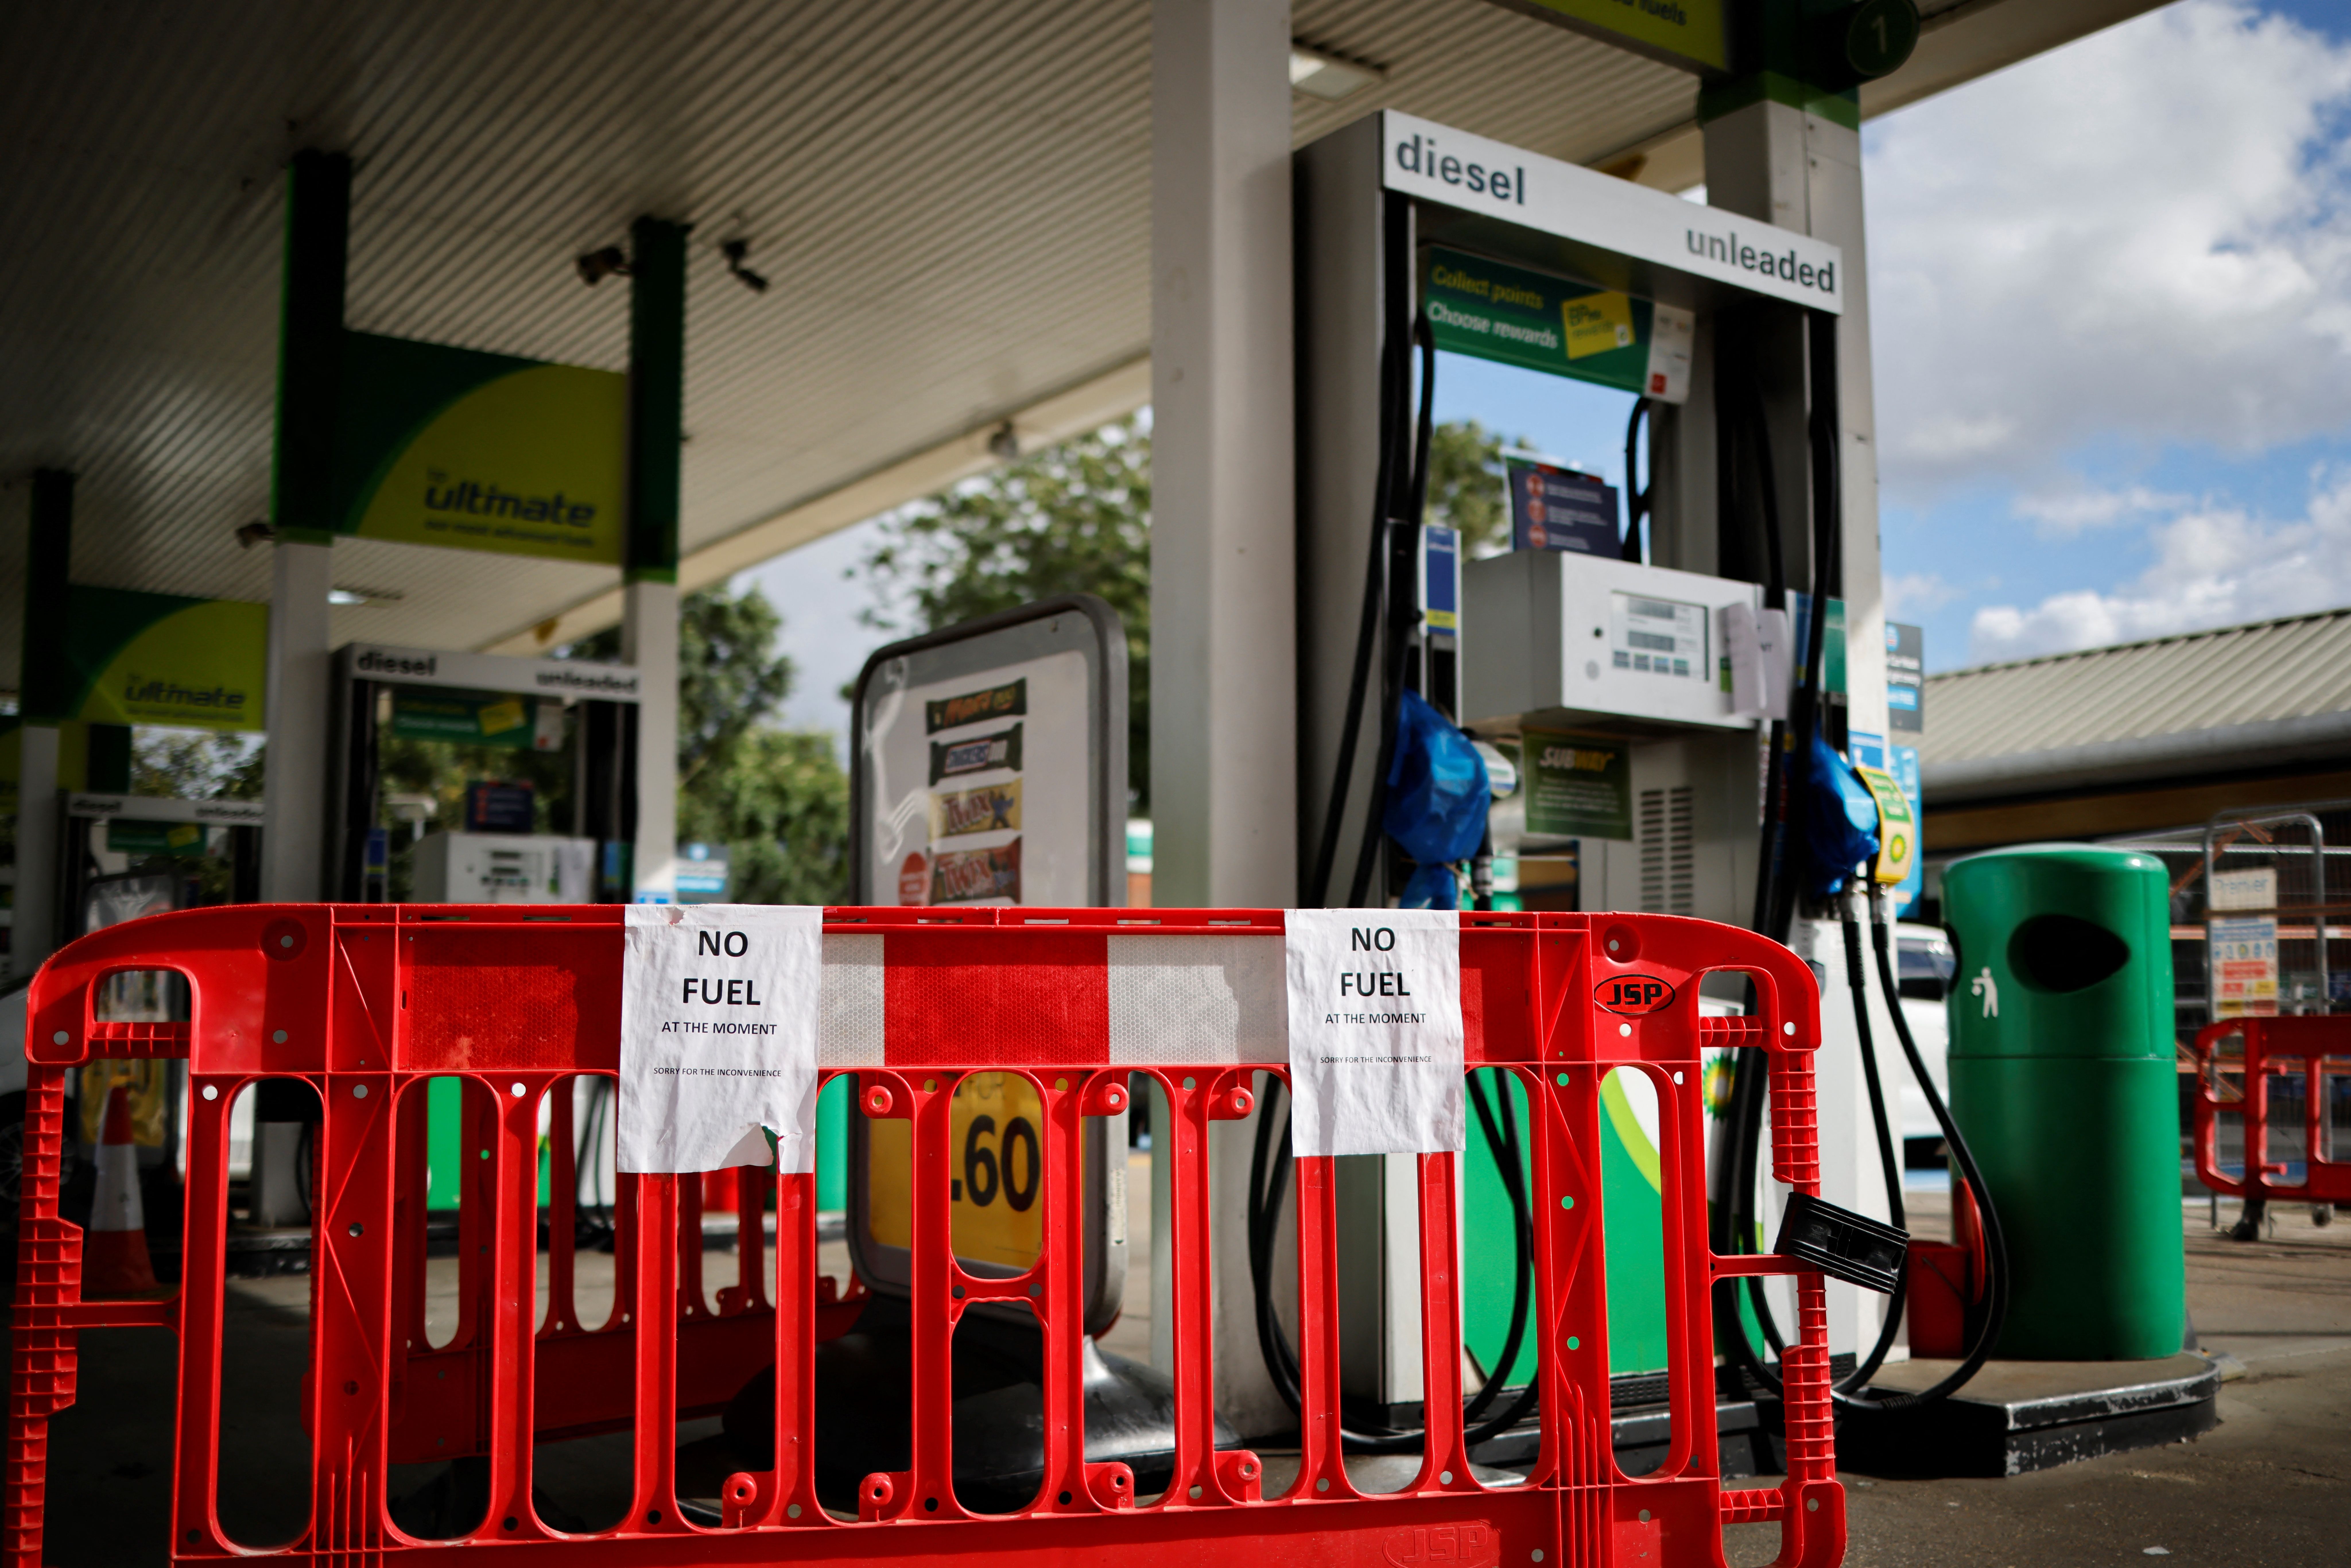 'No fuel' signs are displayed at a gas station in London, U.K. on Wednesday. (Tolga Akmen/AFP via Getty Images)